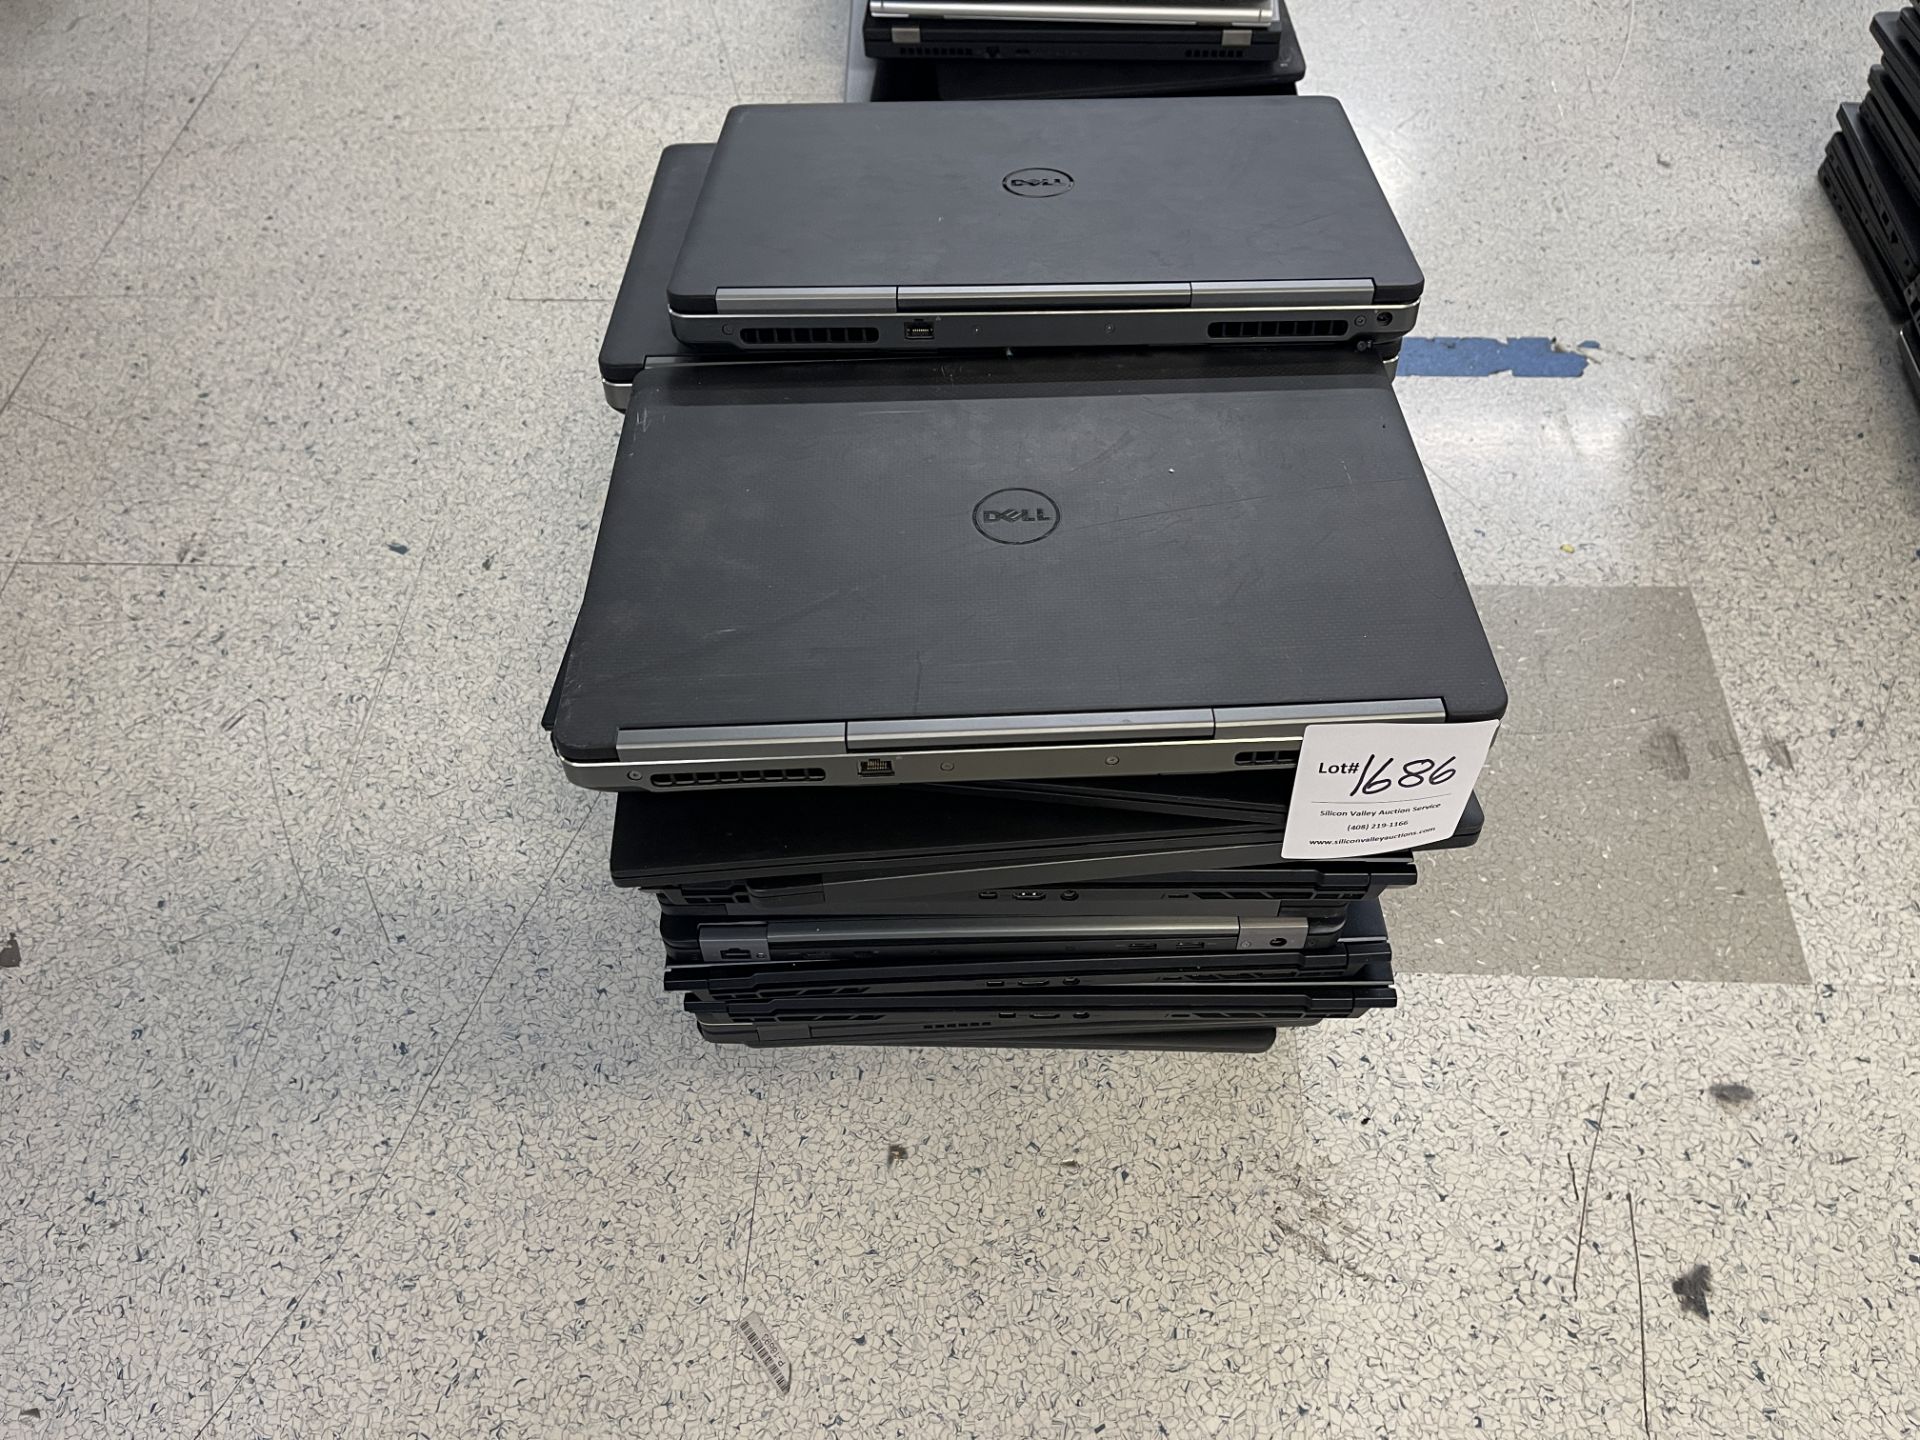 Approximately 20 Dell Laptops - hard drive removed